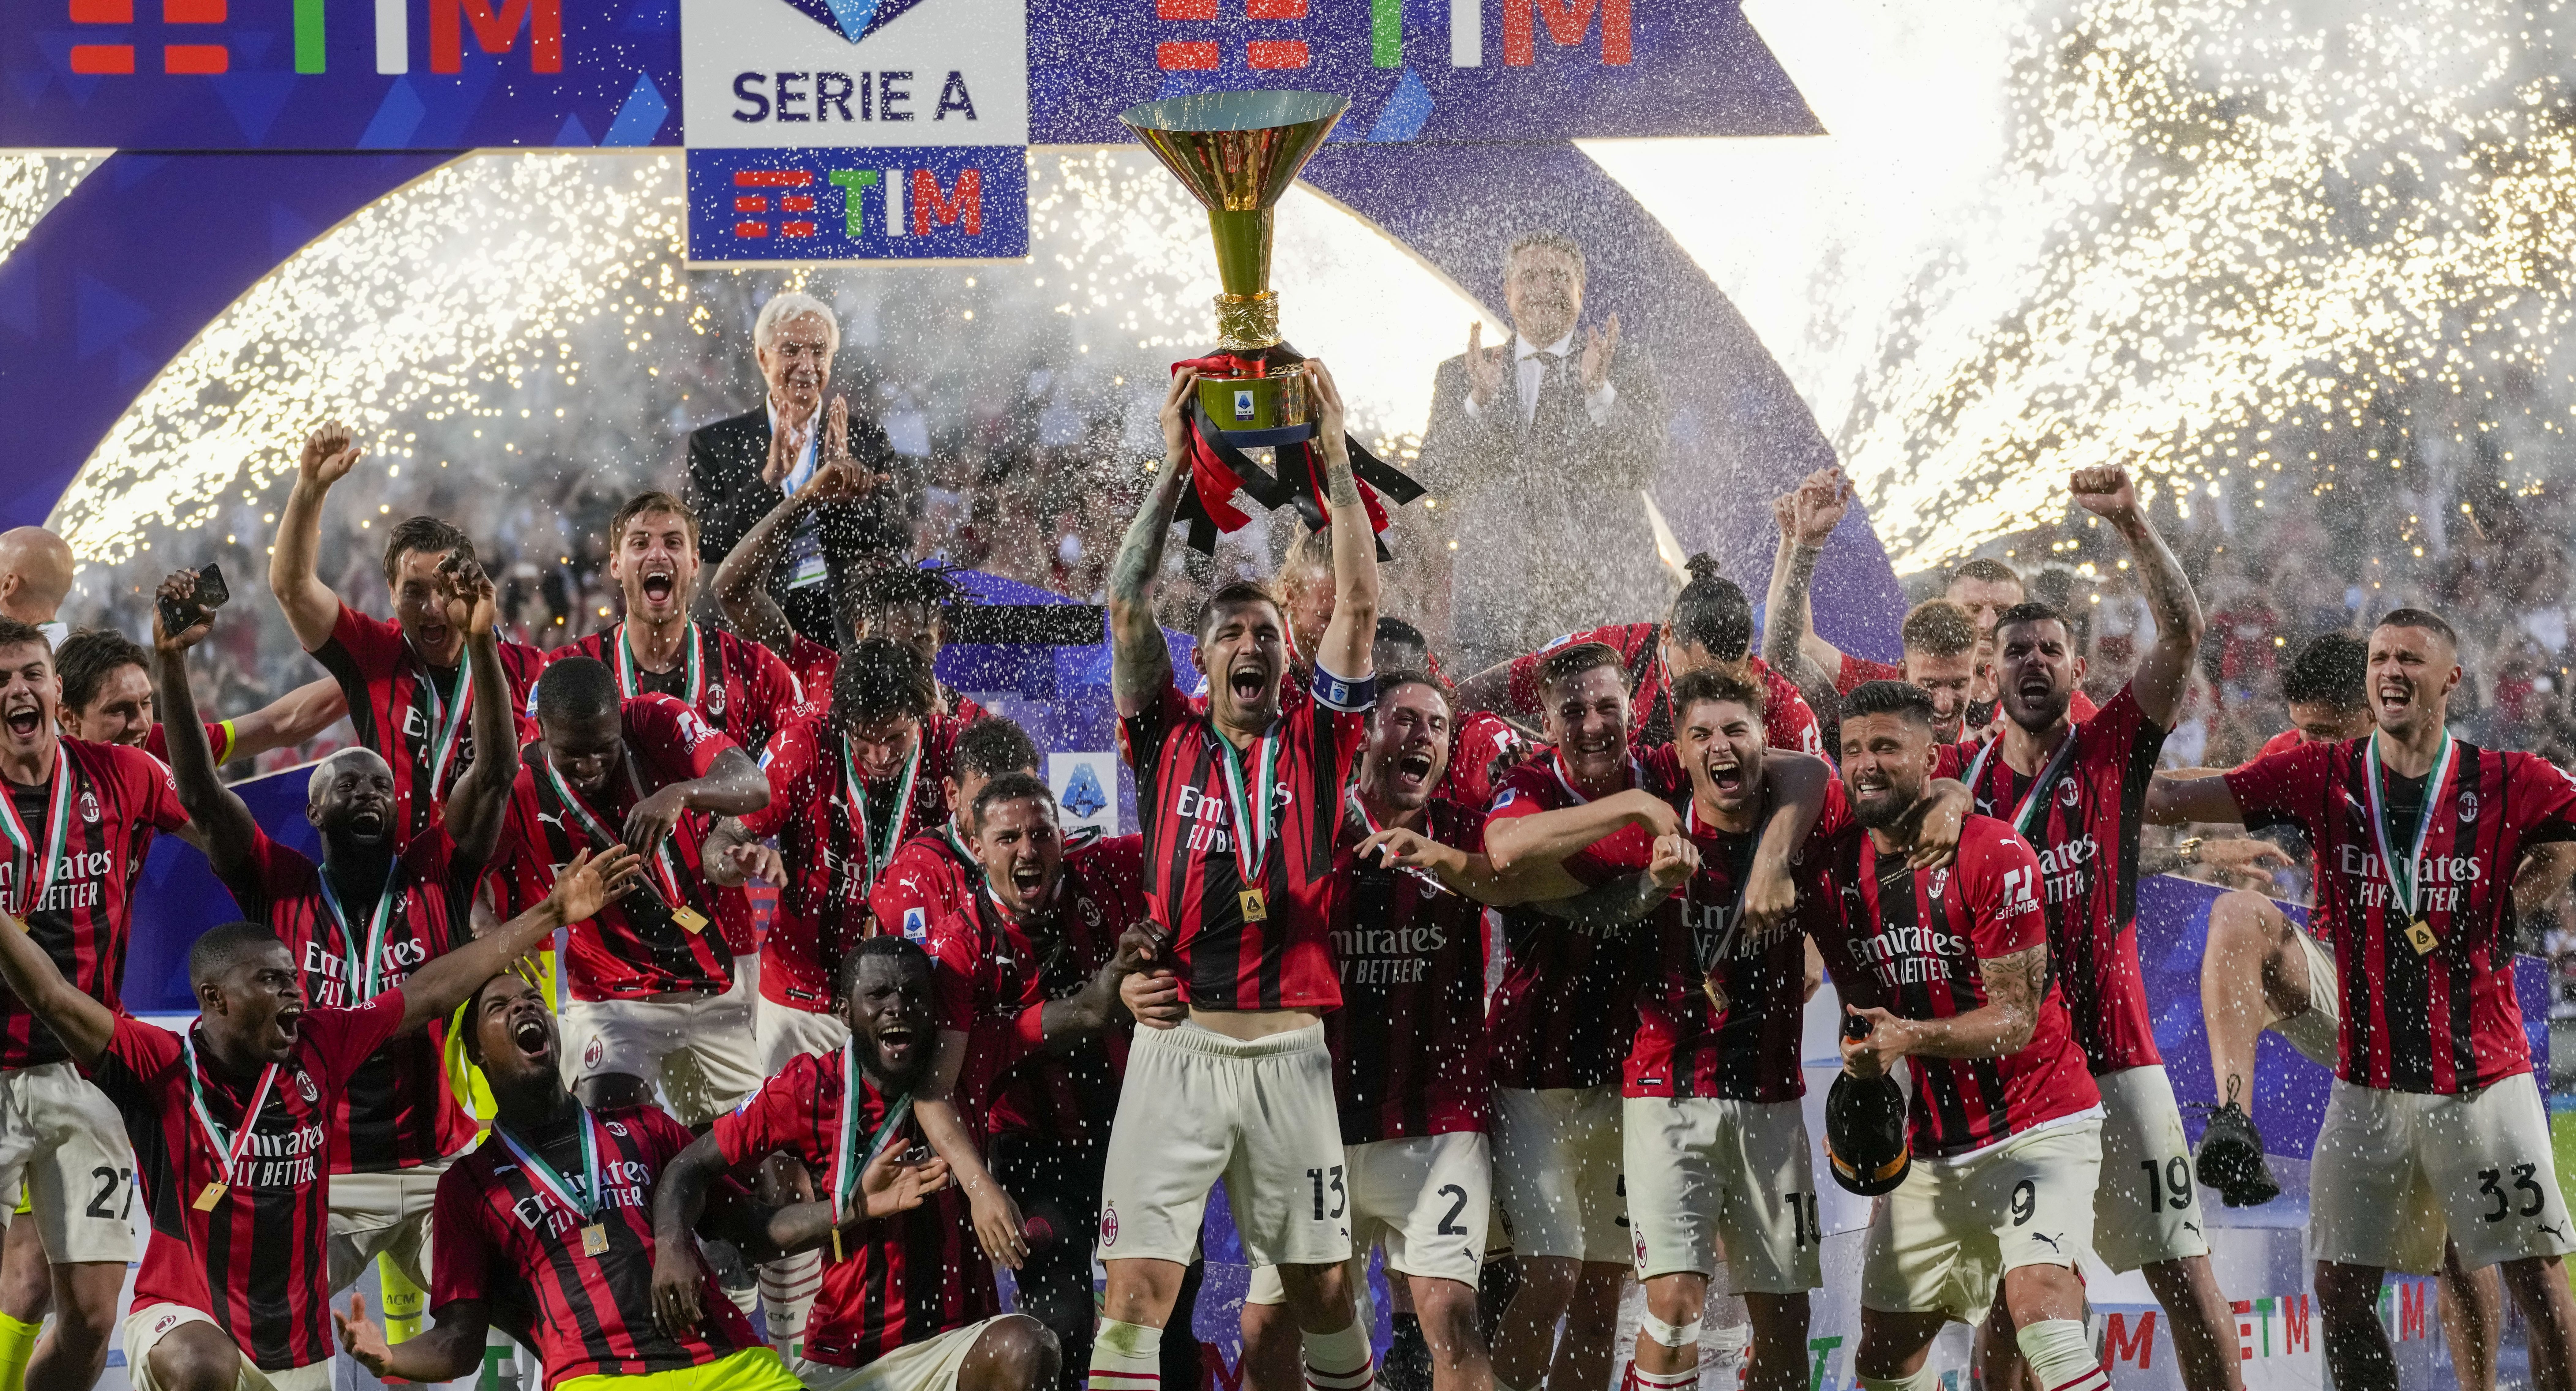 American Investment Firm Redbird to Purchase Serie A Champion A.C. Milan for $1.3B